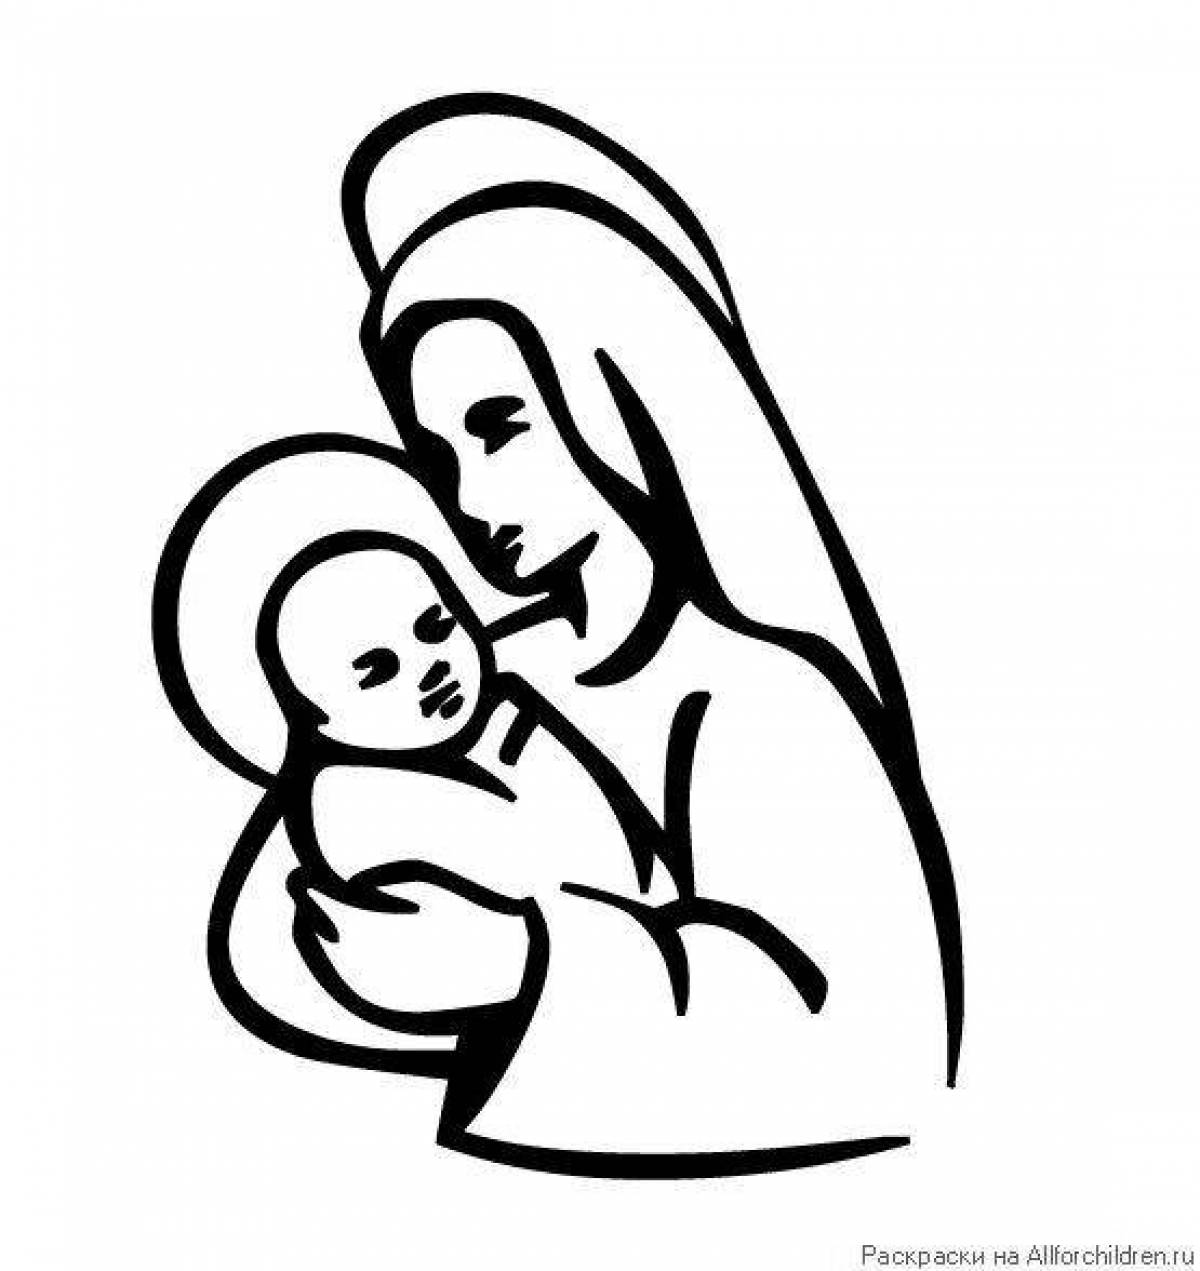 Charming Virgin Mary Coloring Page